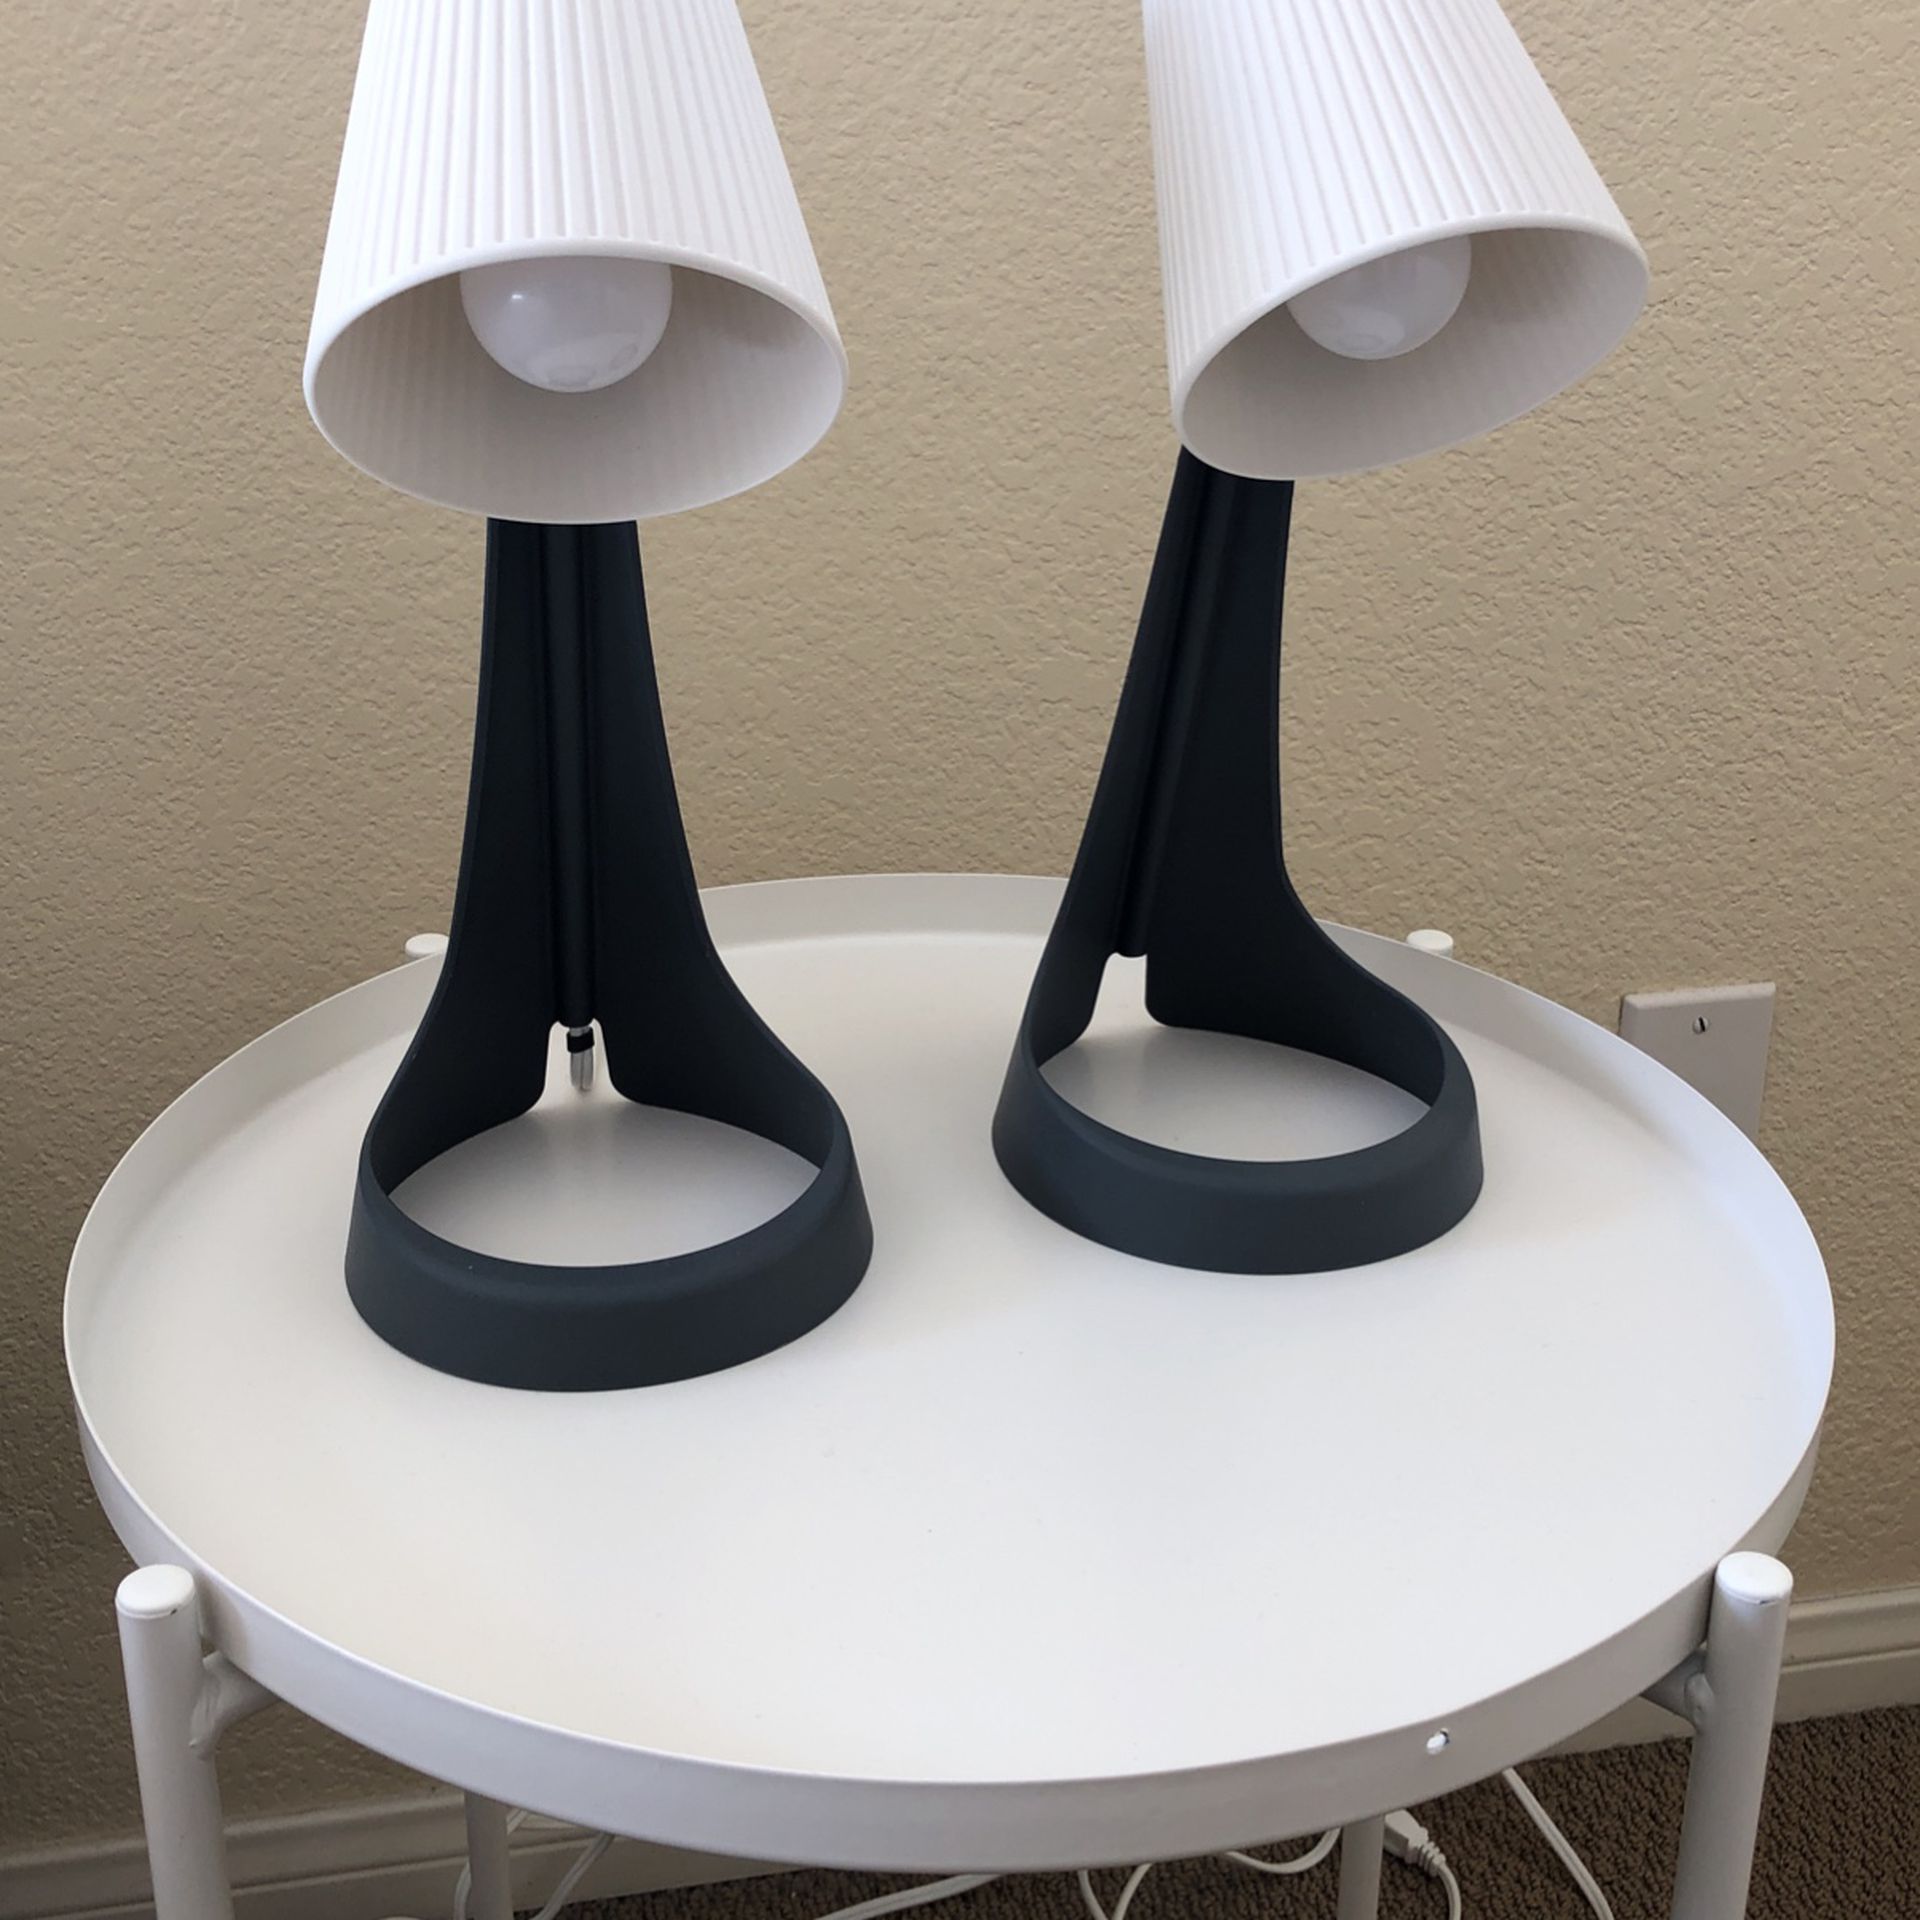 2 Lamps - Table or Work Lamp